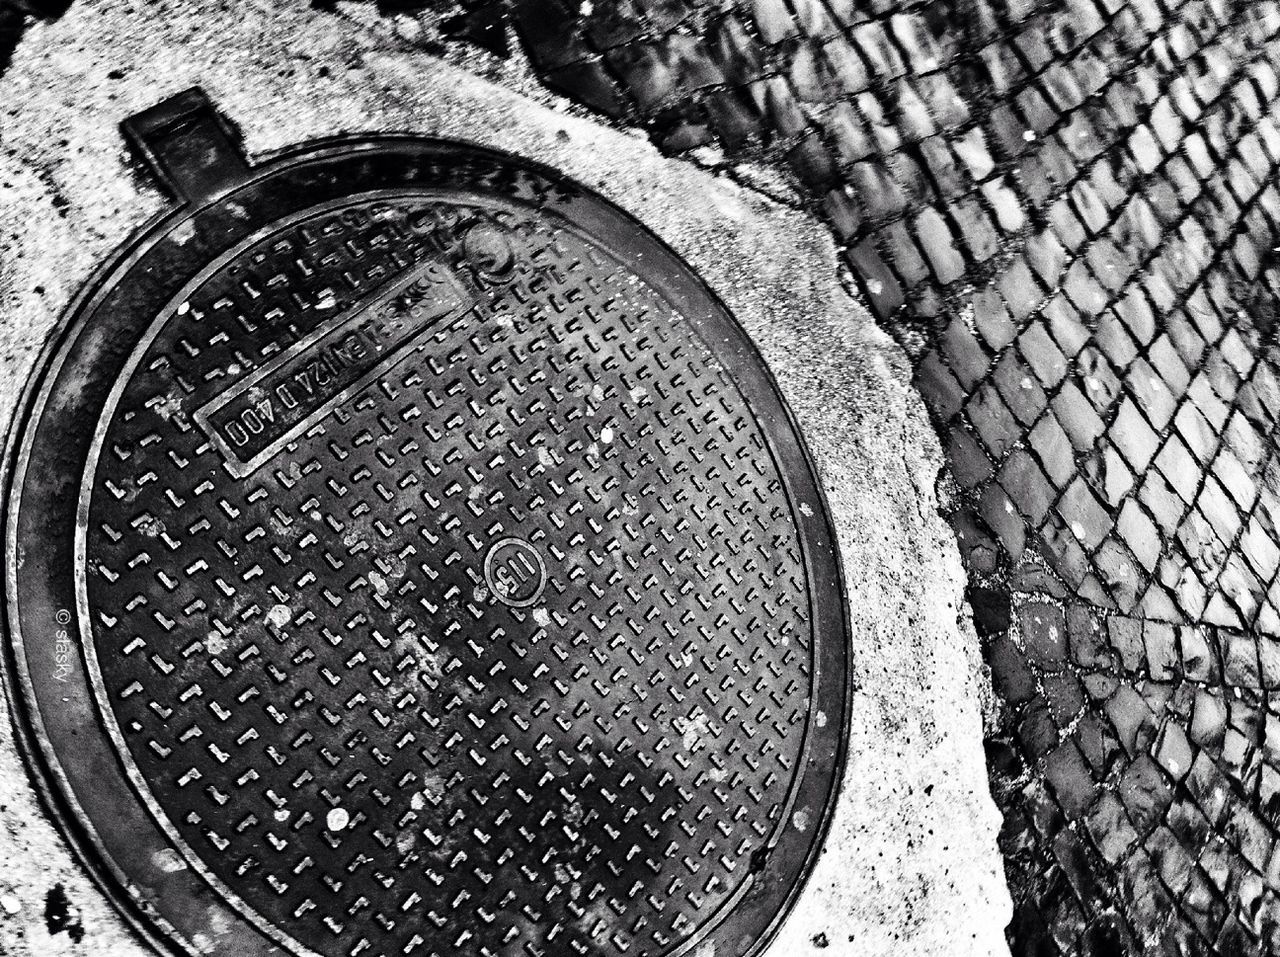 circle, metal, high angle view, geometric shape, close-up, manhole, metallic, directly above, no people, communication, day, old, number, outdoors, textured, rusty, street, hole, pattern, shape